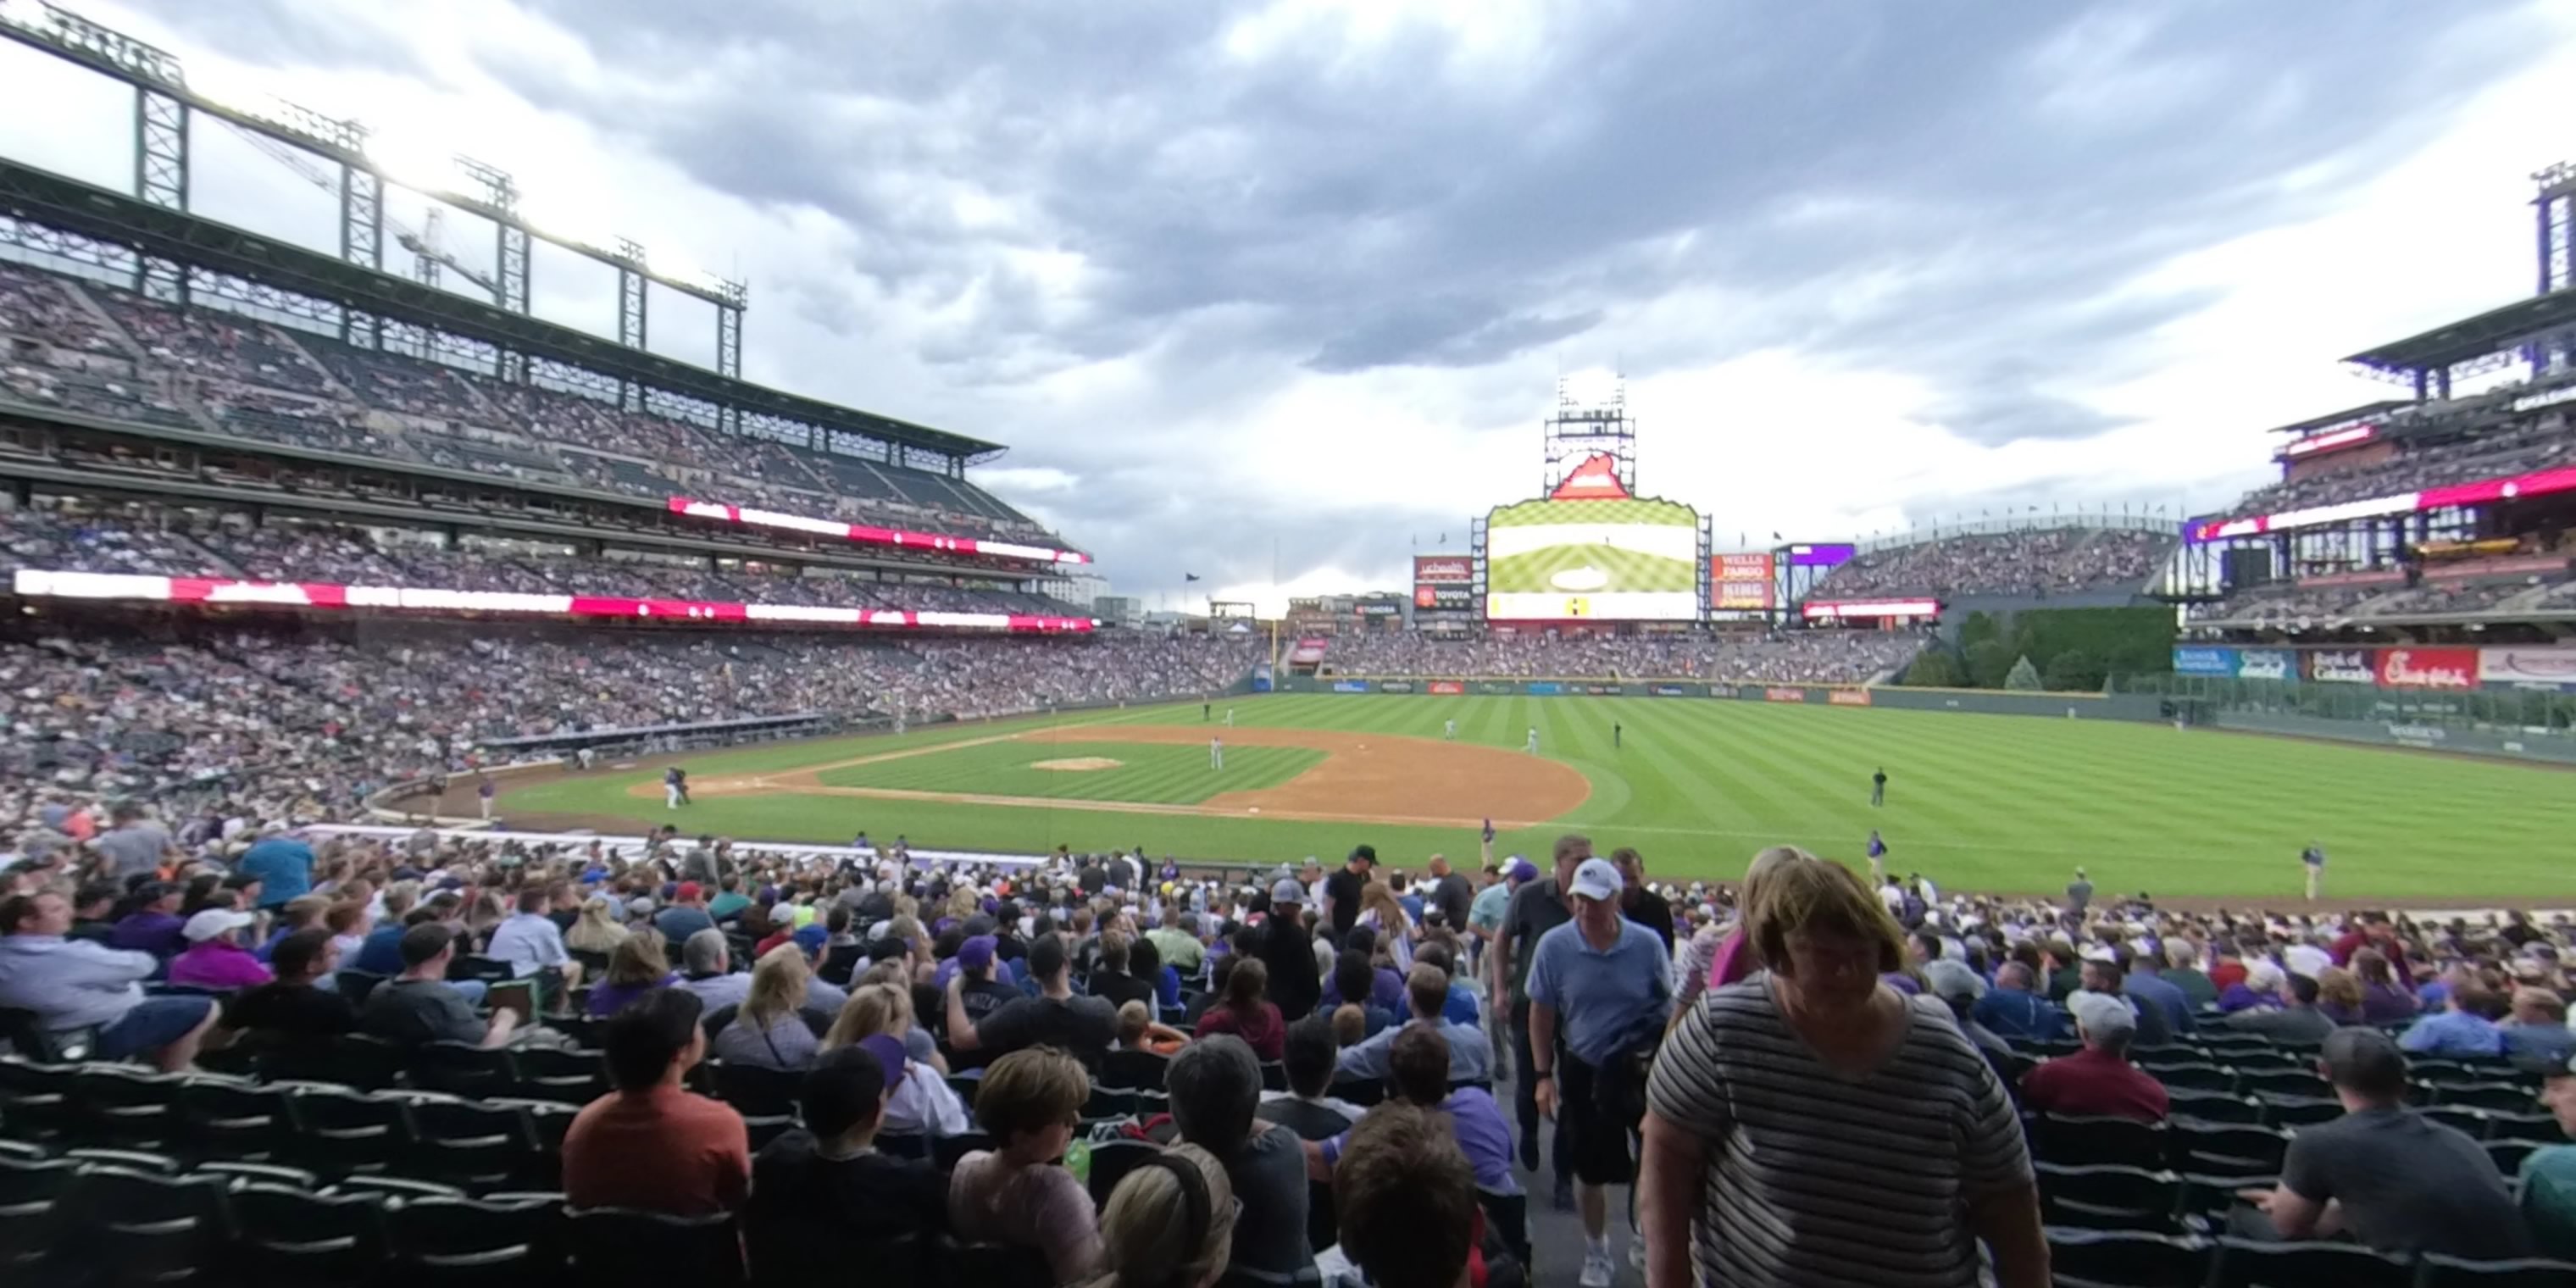 section 120 panoramic seat view  - coors field